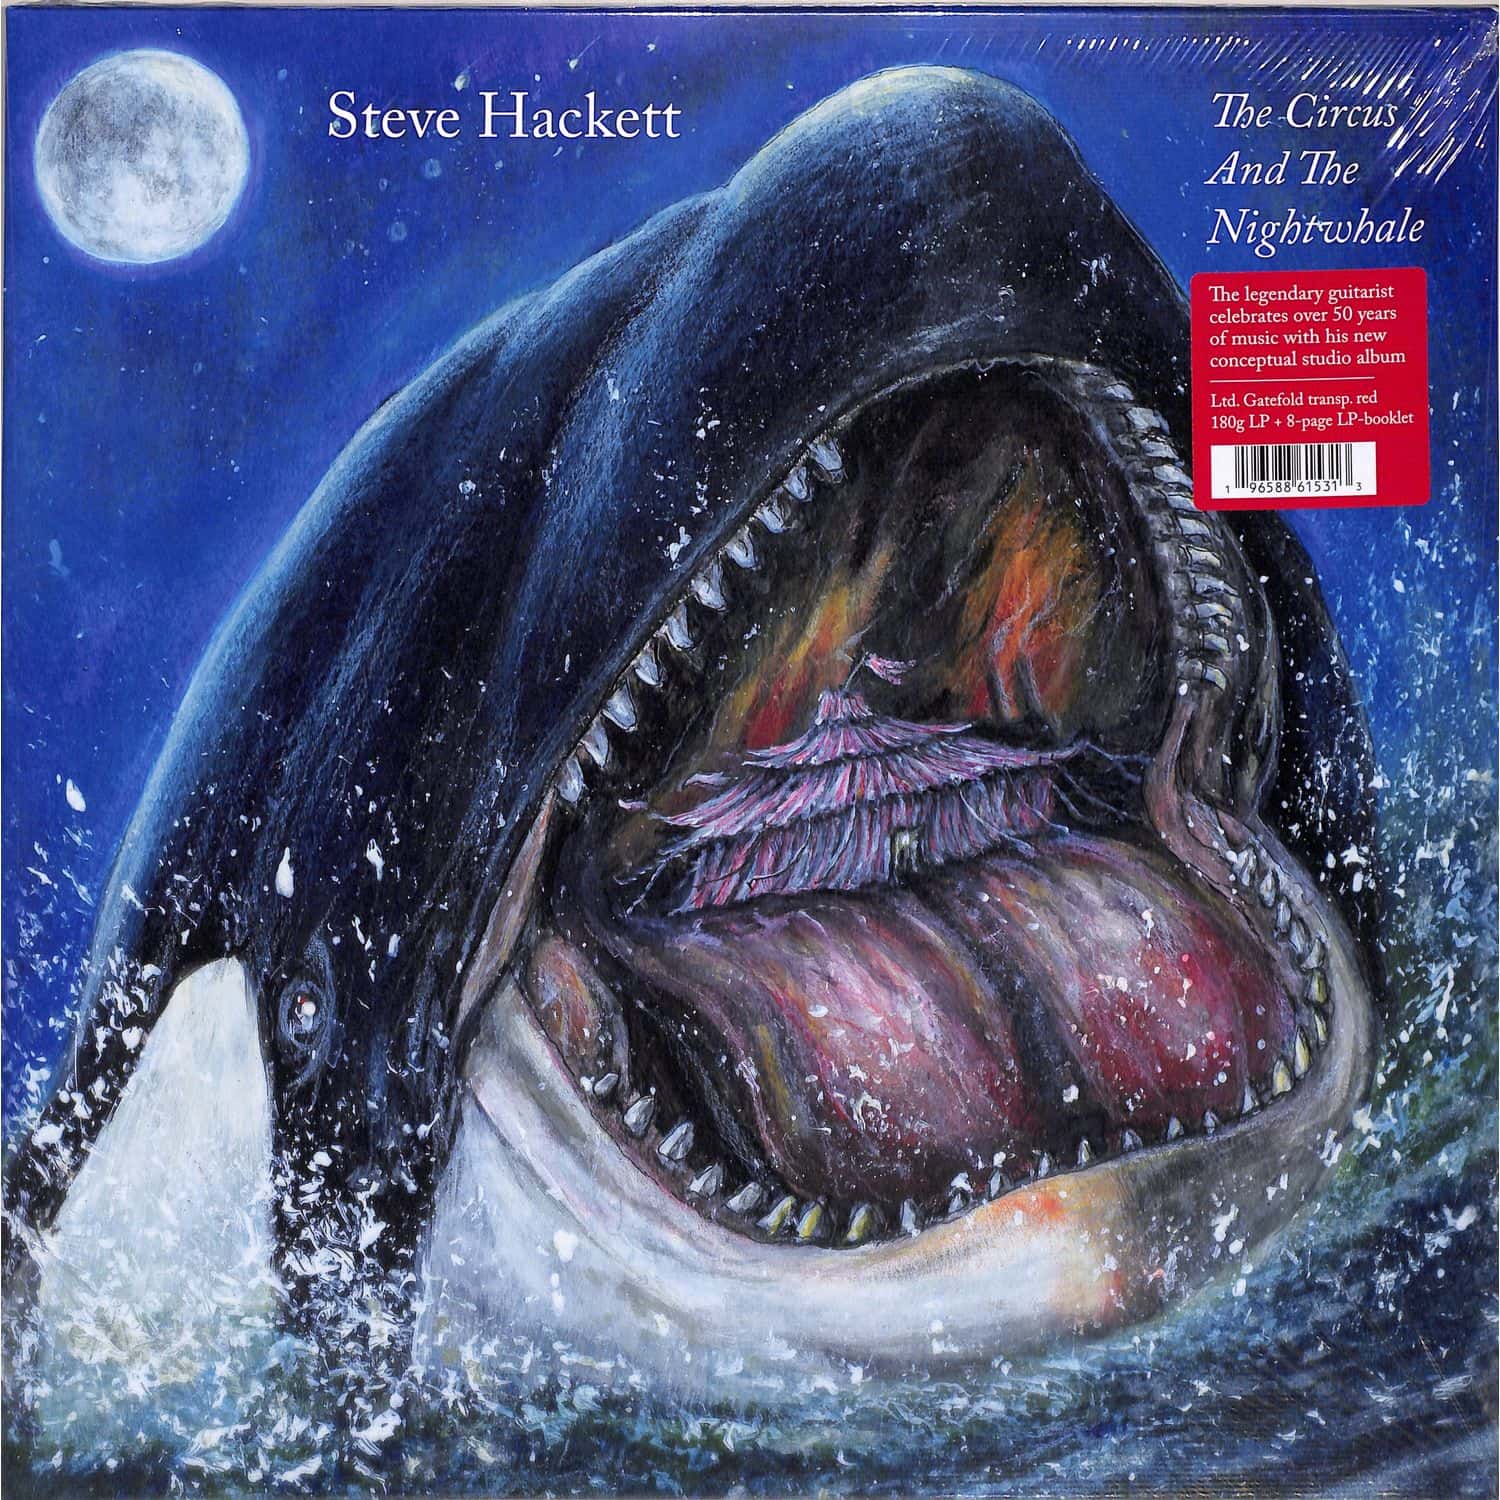 Steve Hackett - THE CIRCUS AND THE NIGHTWHALE 